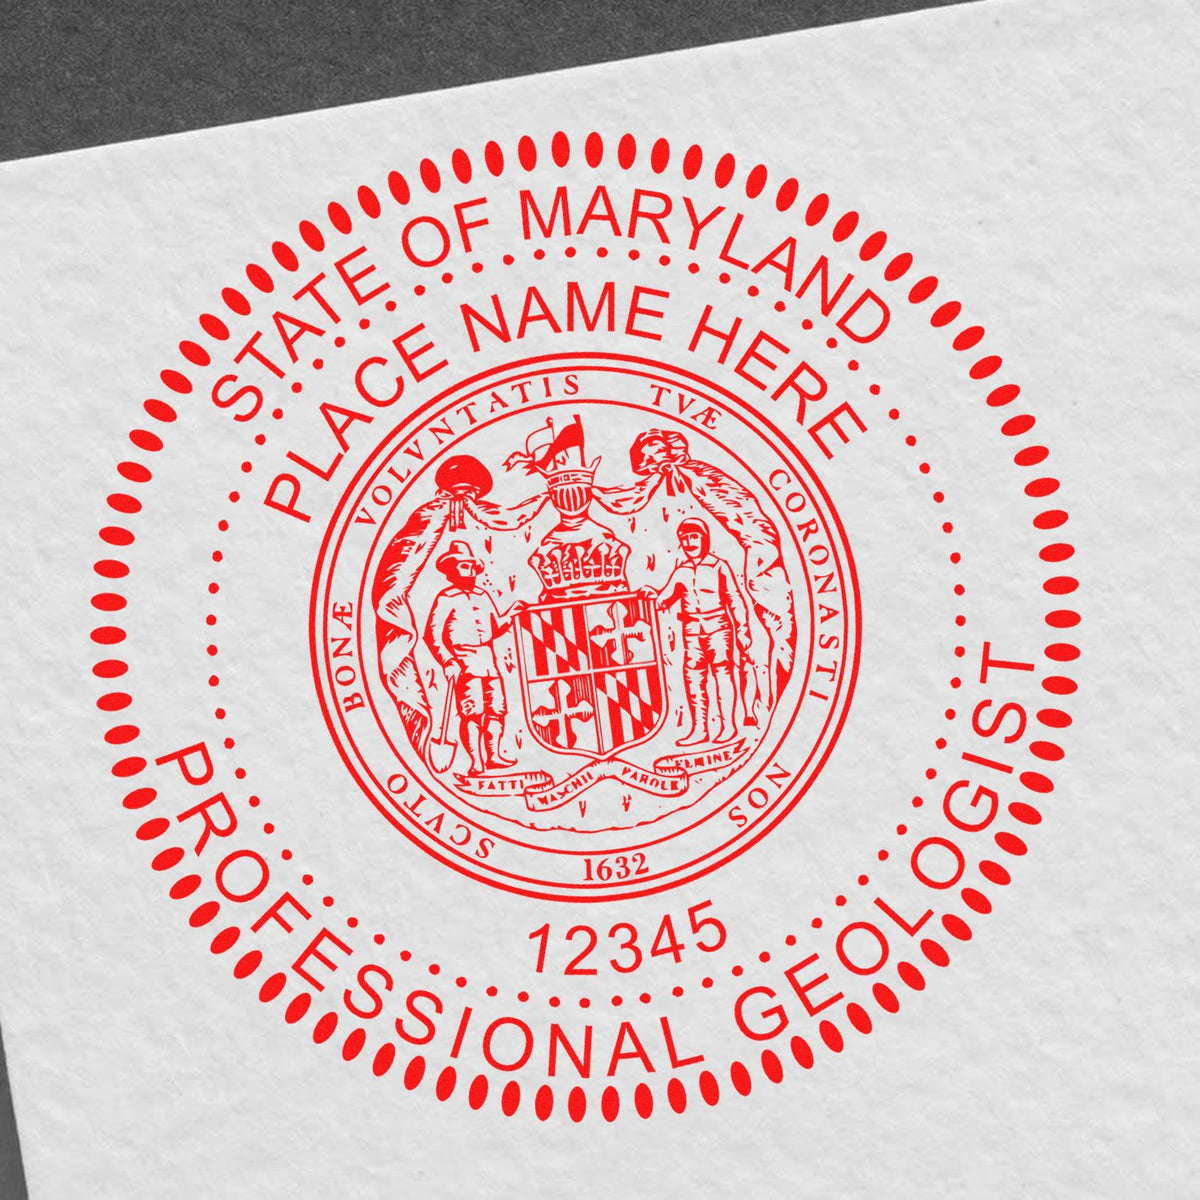 An in use photo of the Digital Maryland Geologist Stamp, Electronic Seal for Maryland Geologist showing a sample imprint on a cardstock